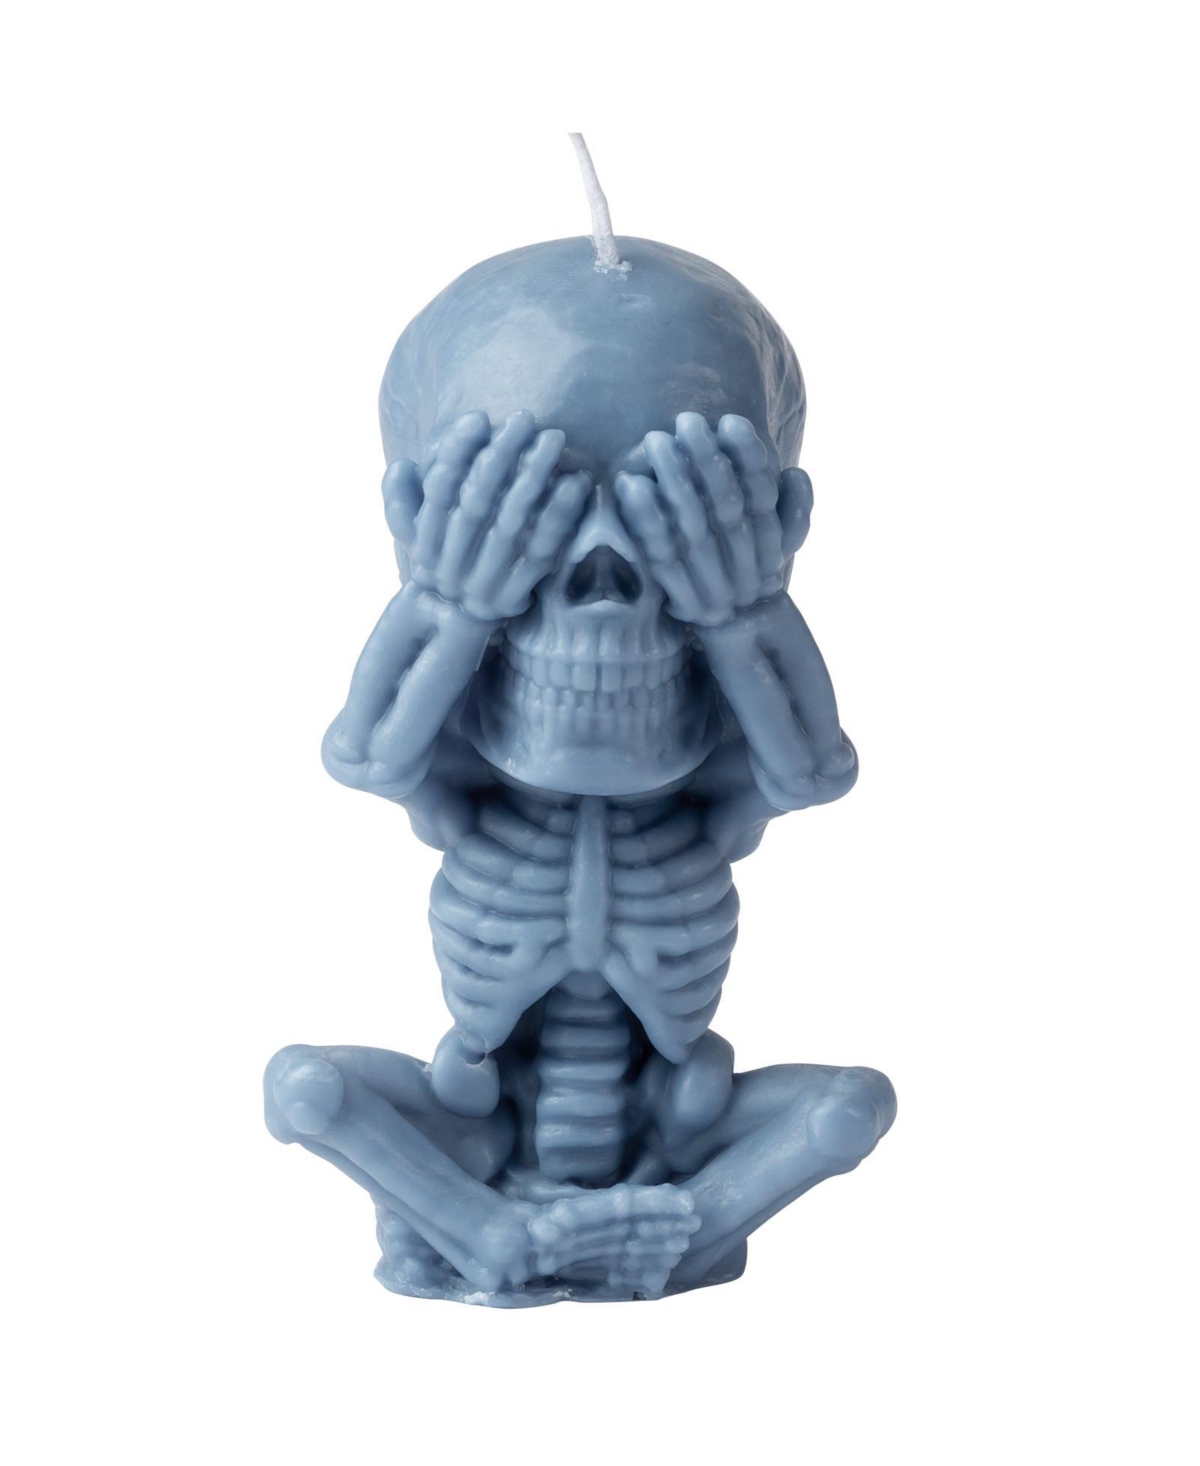 Skull Covering Eyes Creative Candle for Spooky Halloween Decoration - Blue